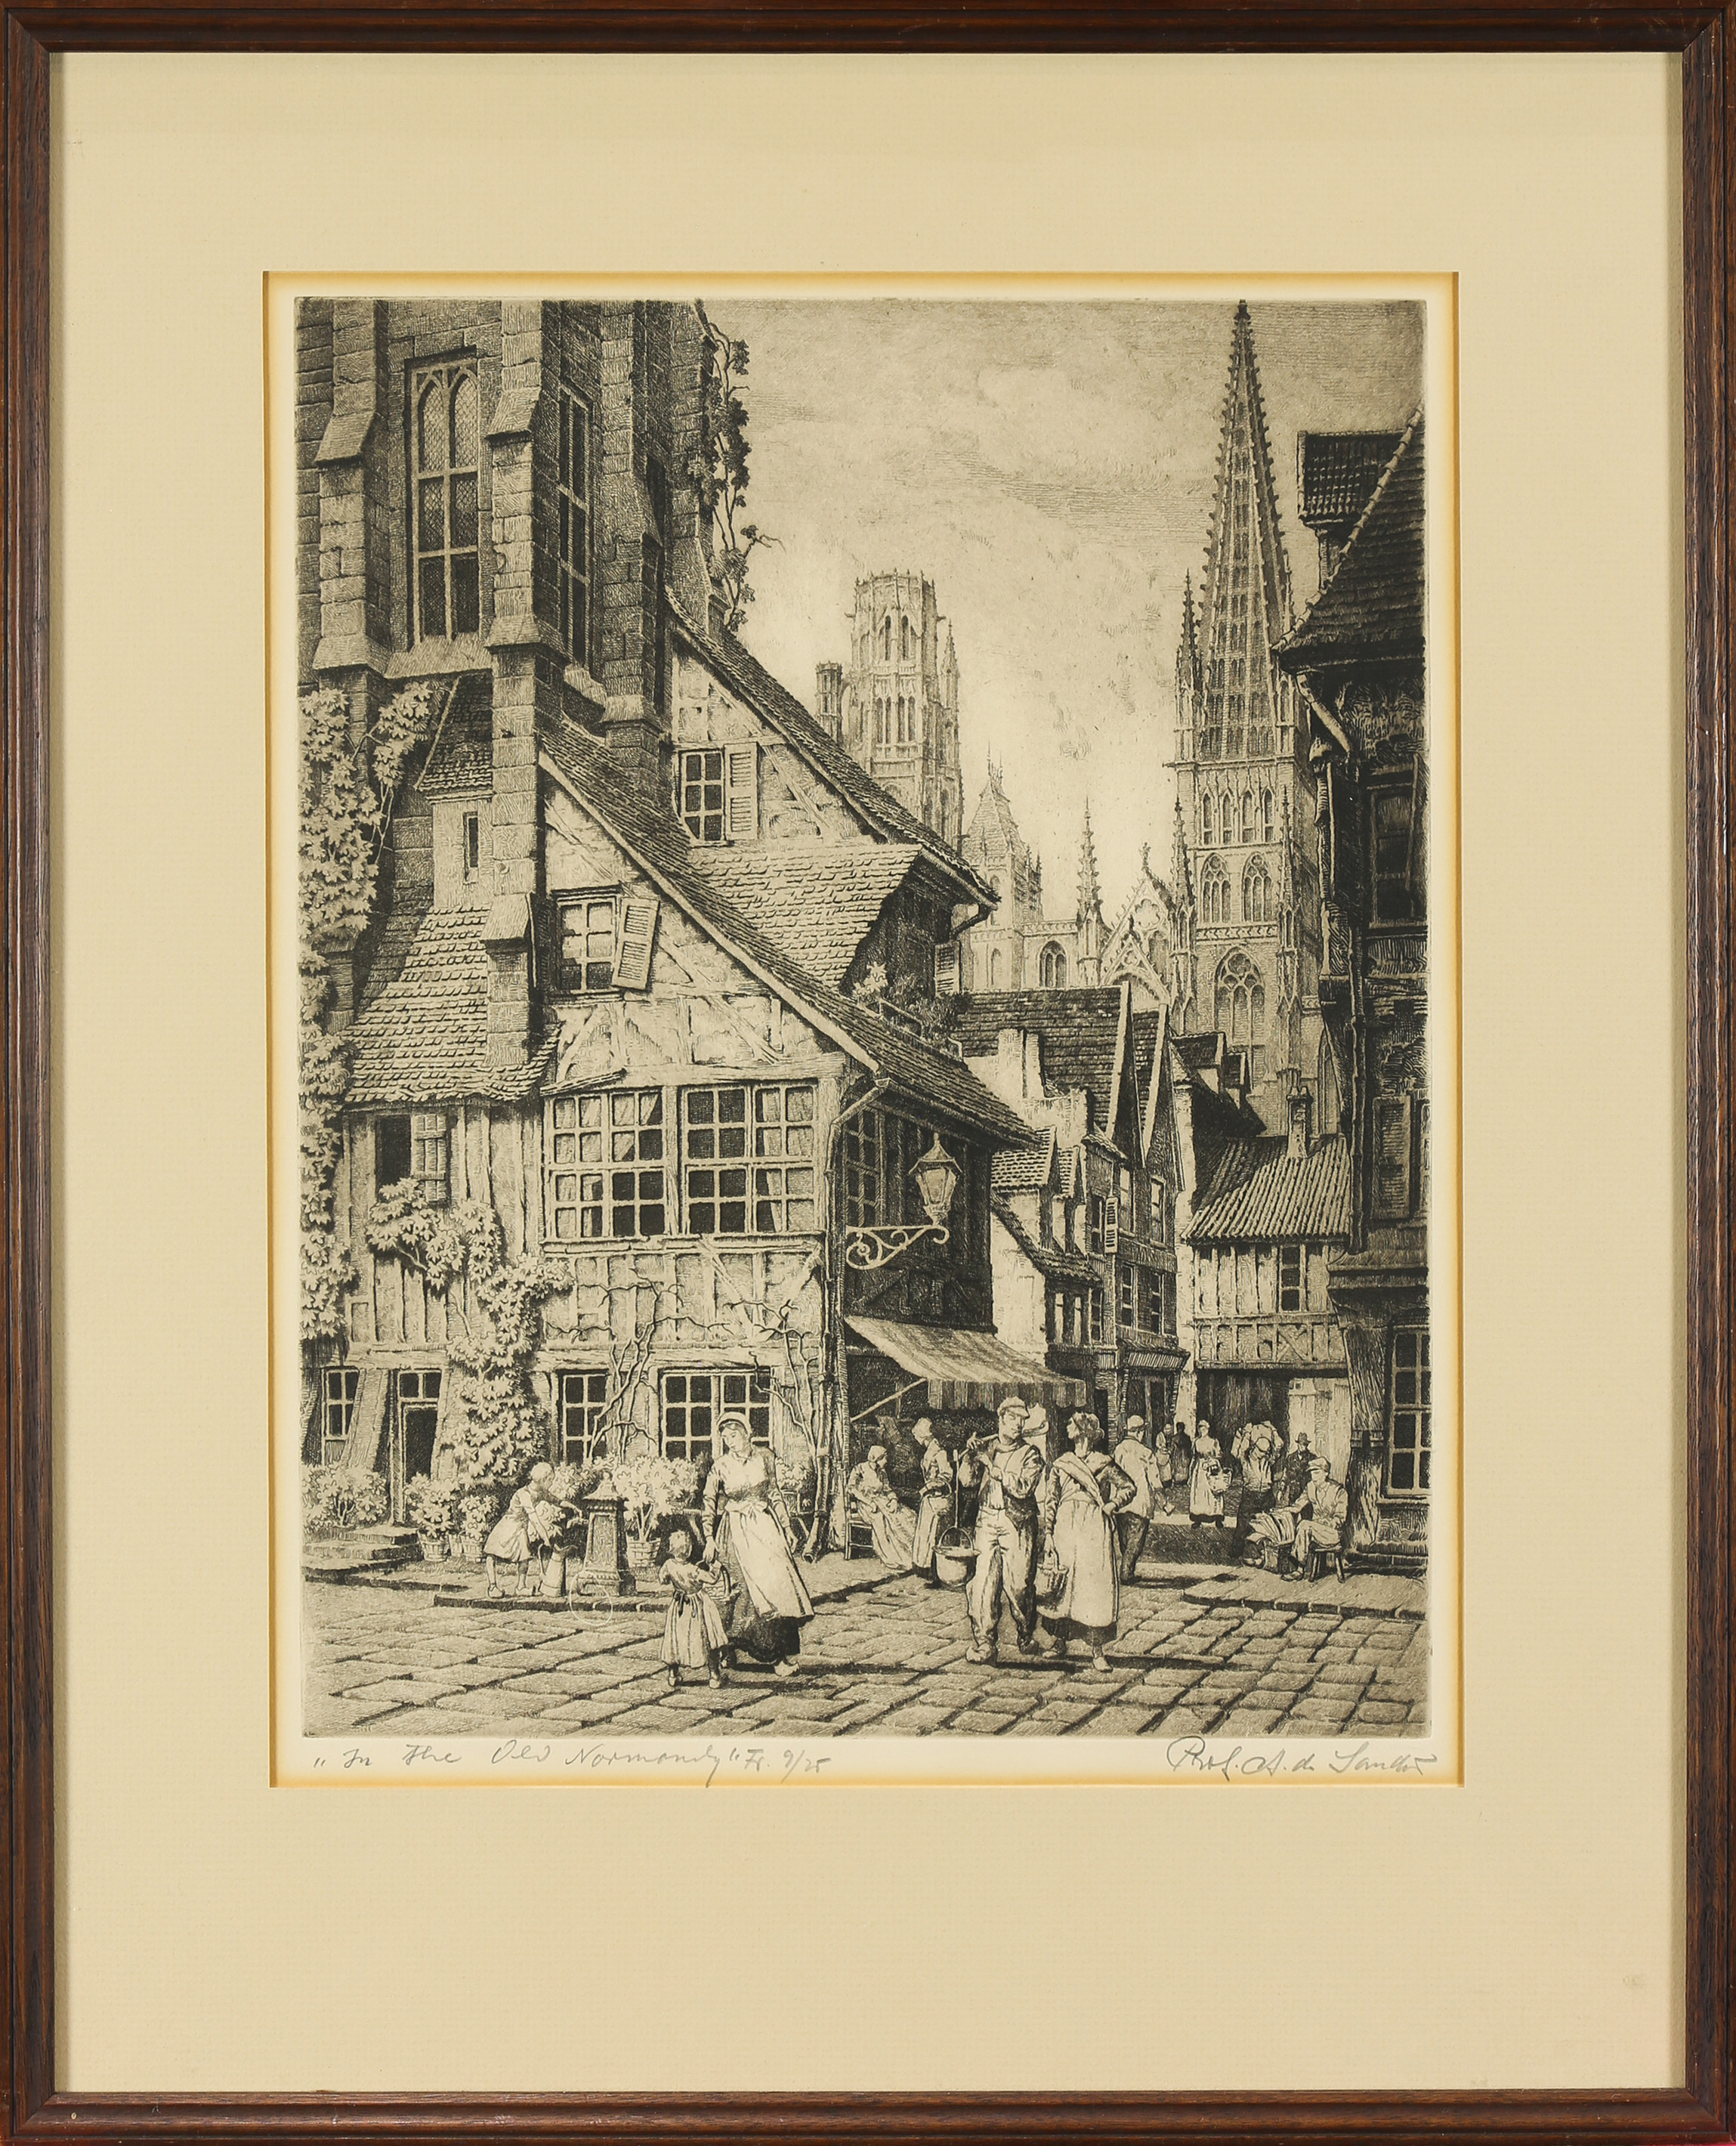 PRINT, "IN THE OLD NORMANDY" Continental